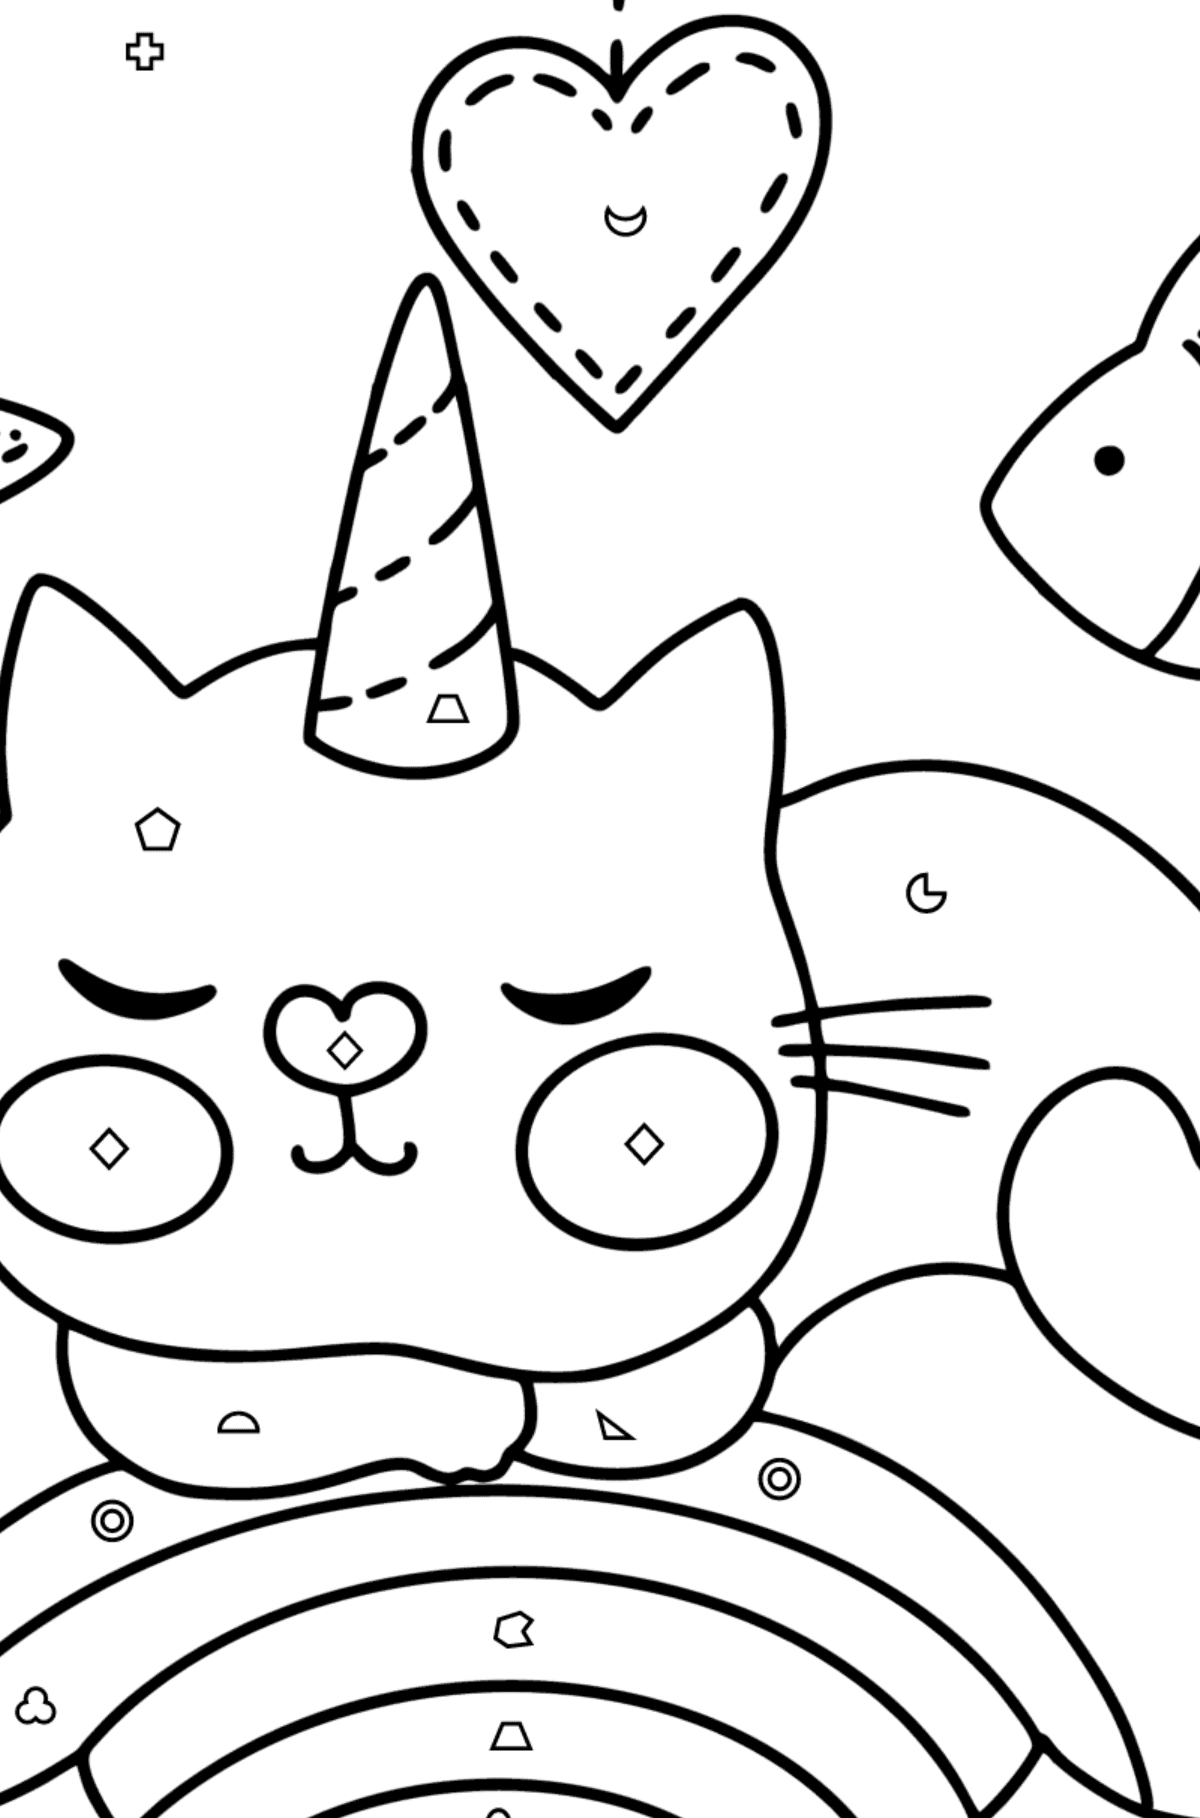 Cute cat unicorn coloring page - Coloring by Geometric Shapes for Kids